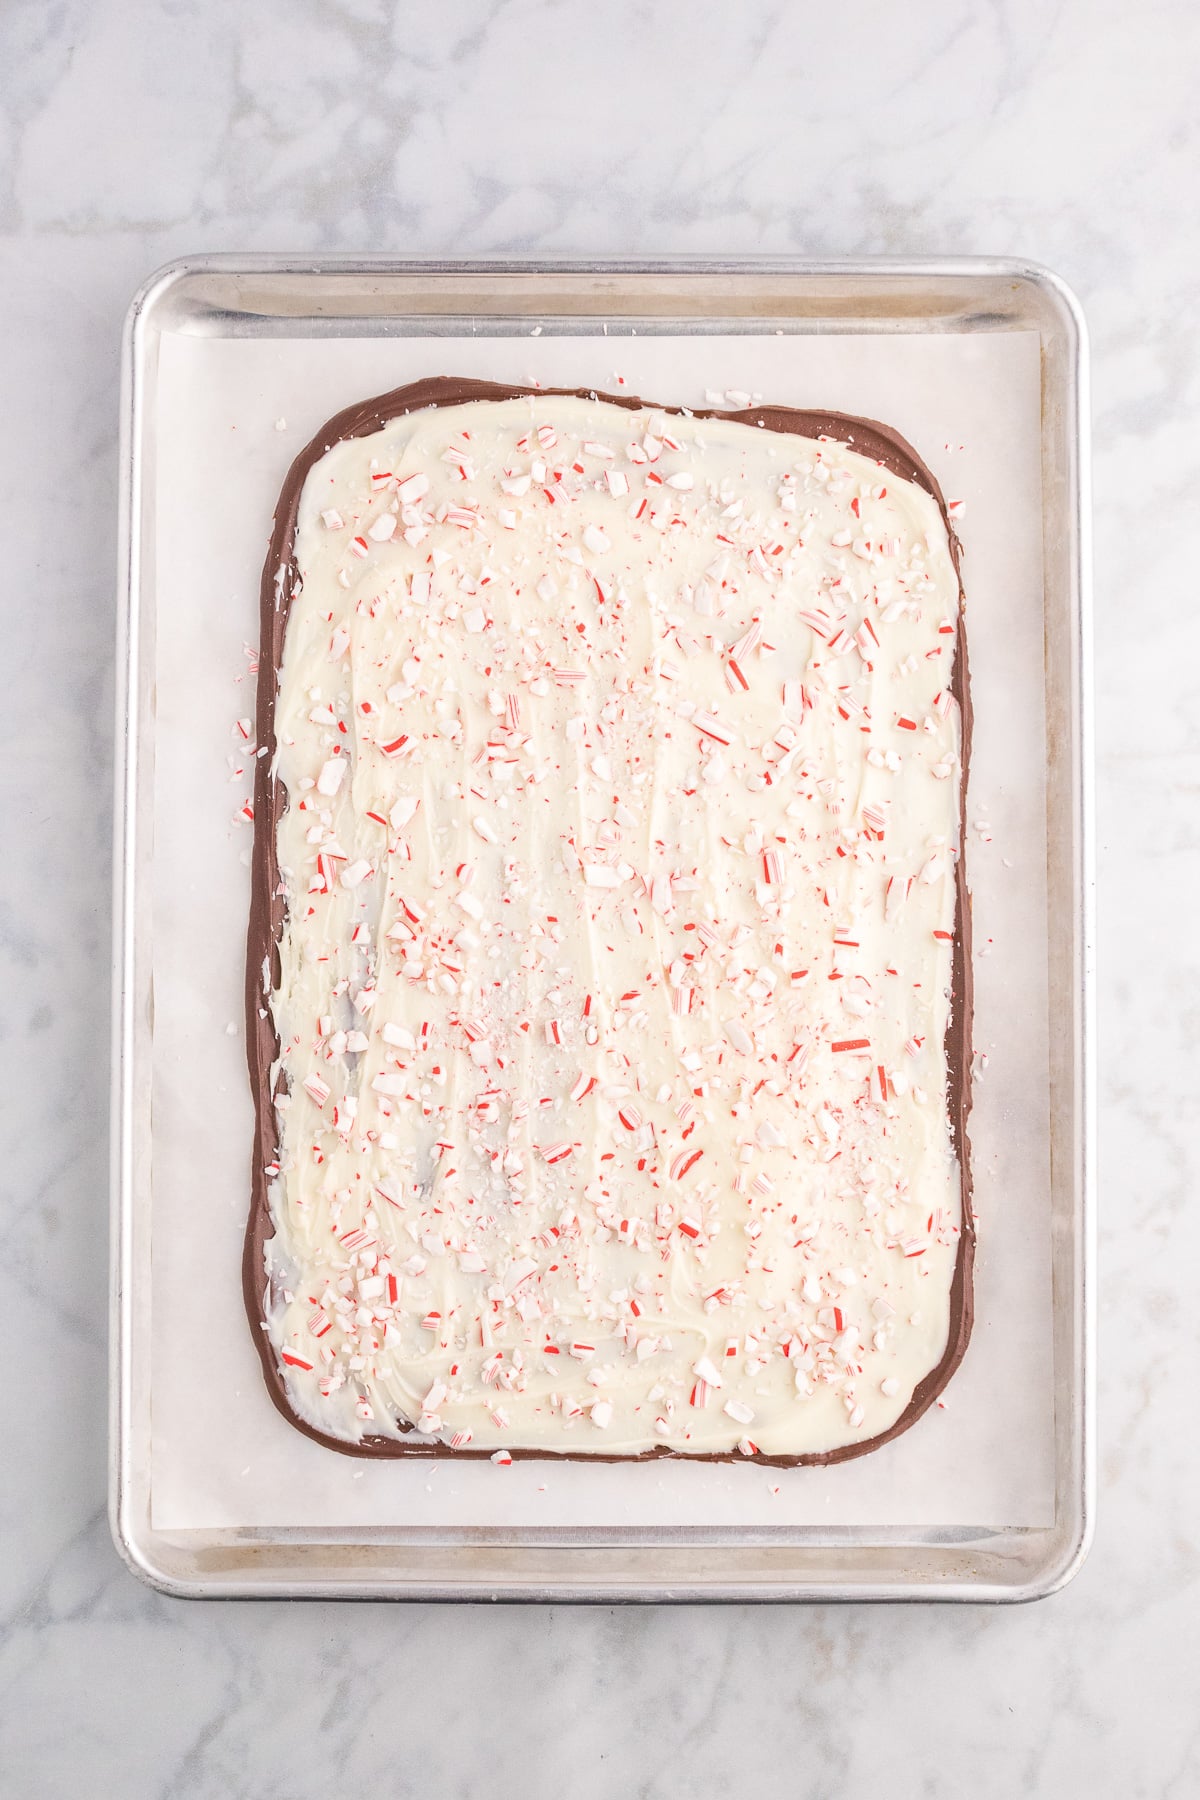 White chocolate peppermint bark in a large piece on a baking sheet.